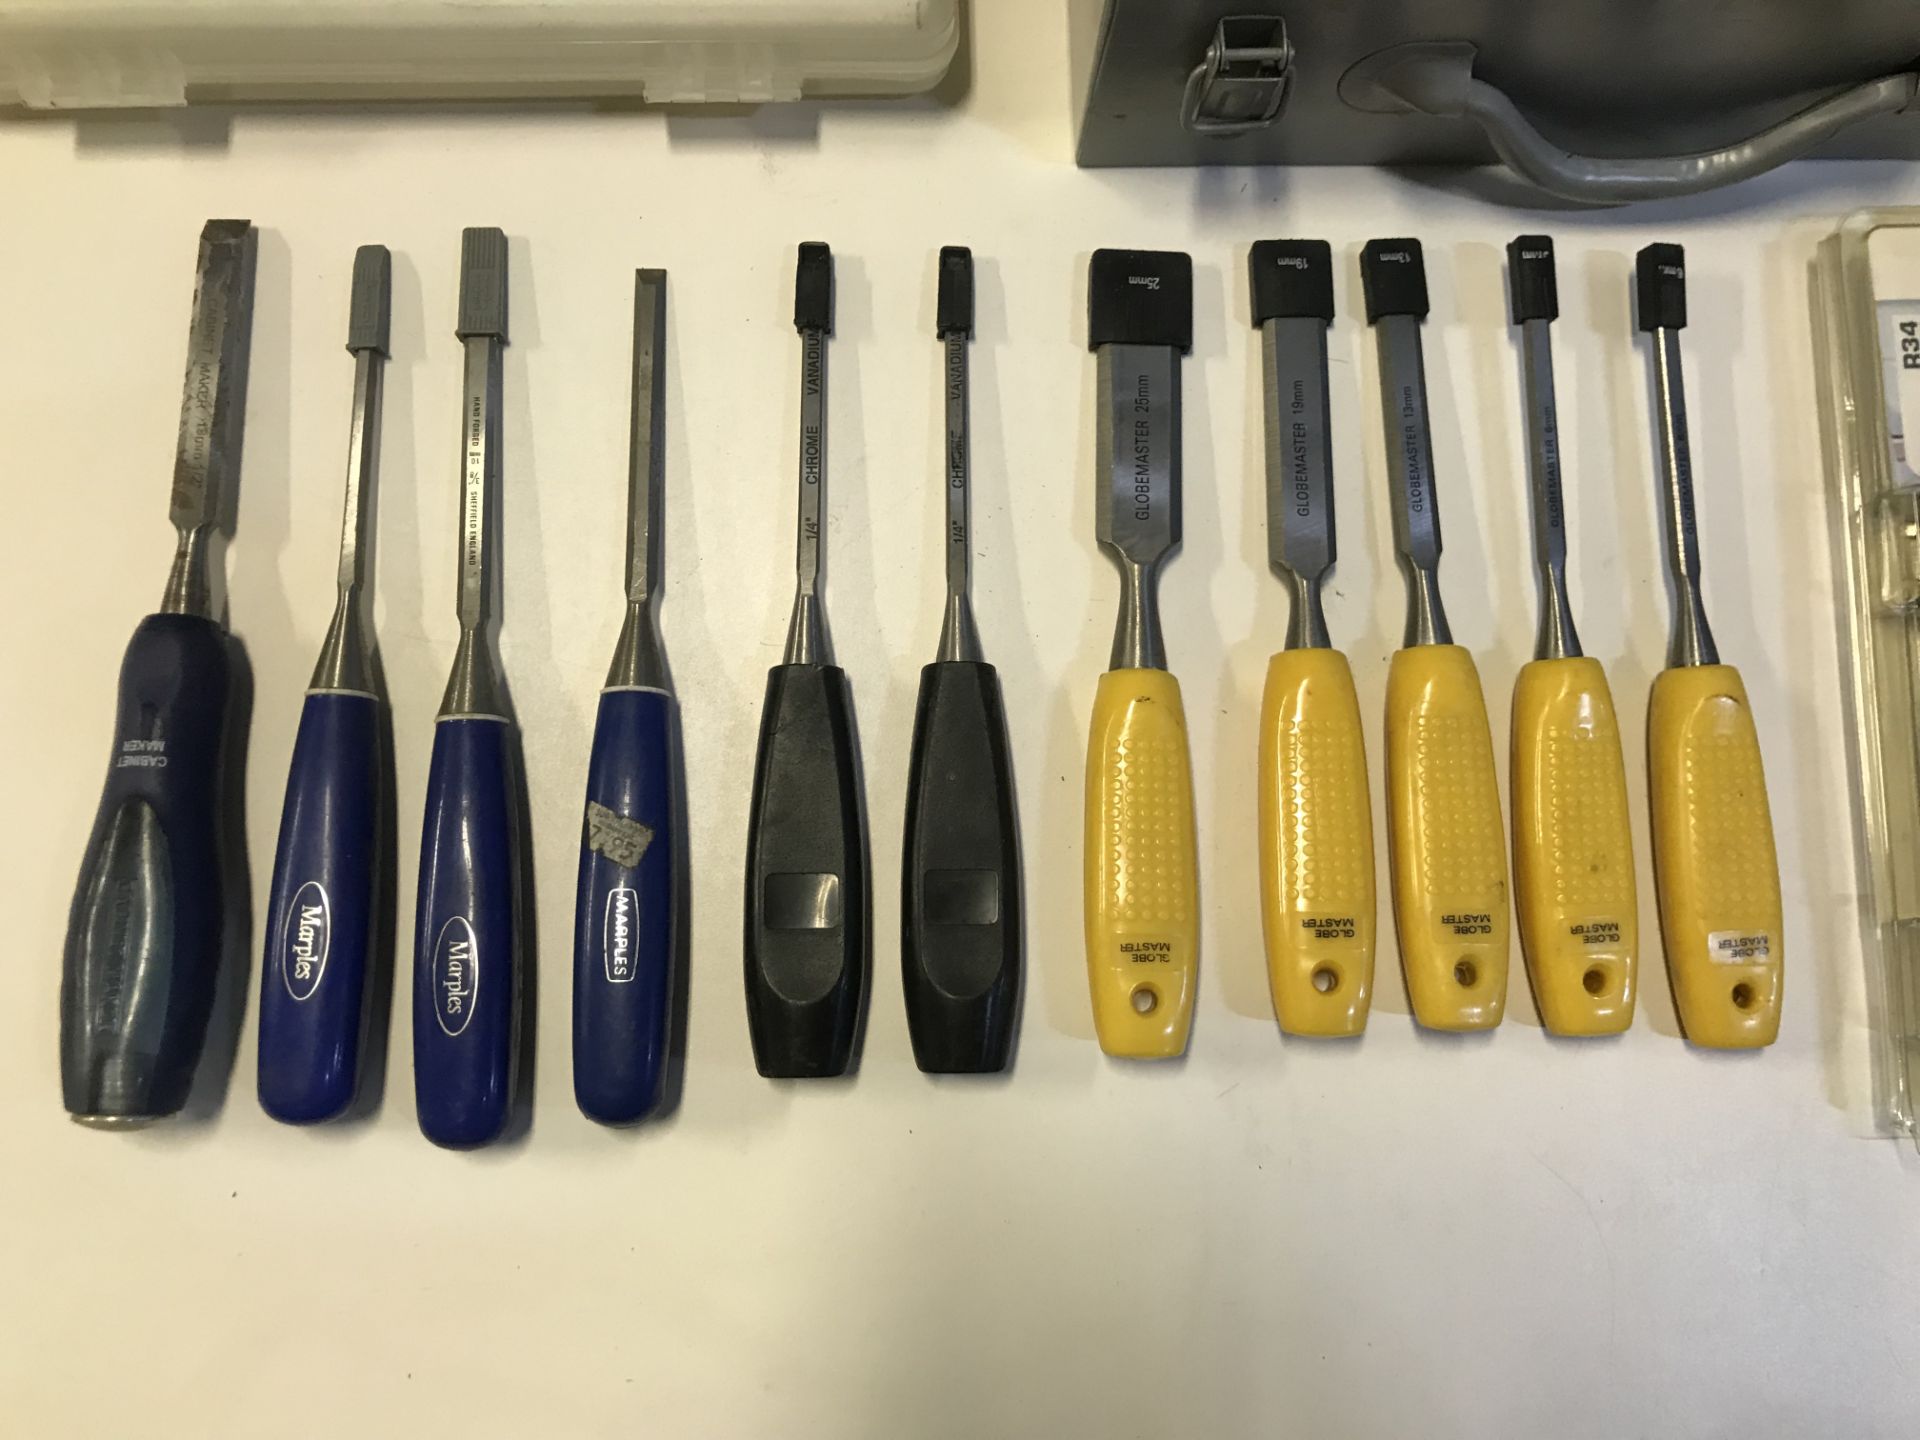 Quantity of various hand tools - Staple Gun, Wrenches, Screwdrivers & Files - as per photos - Image 2 of 5